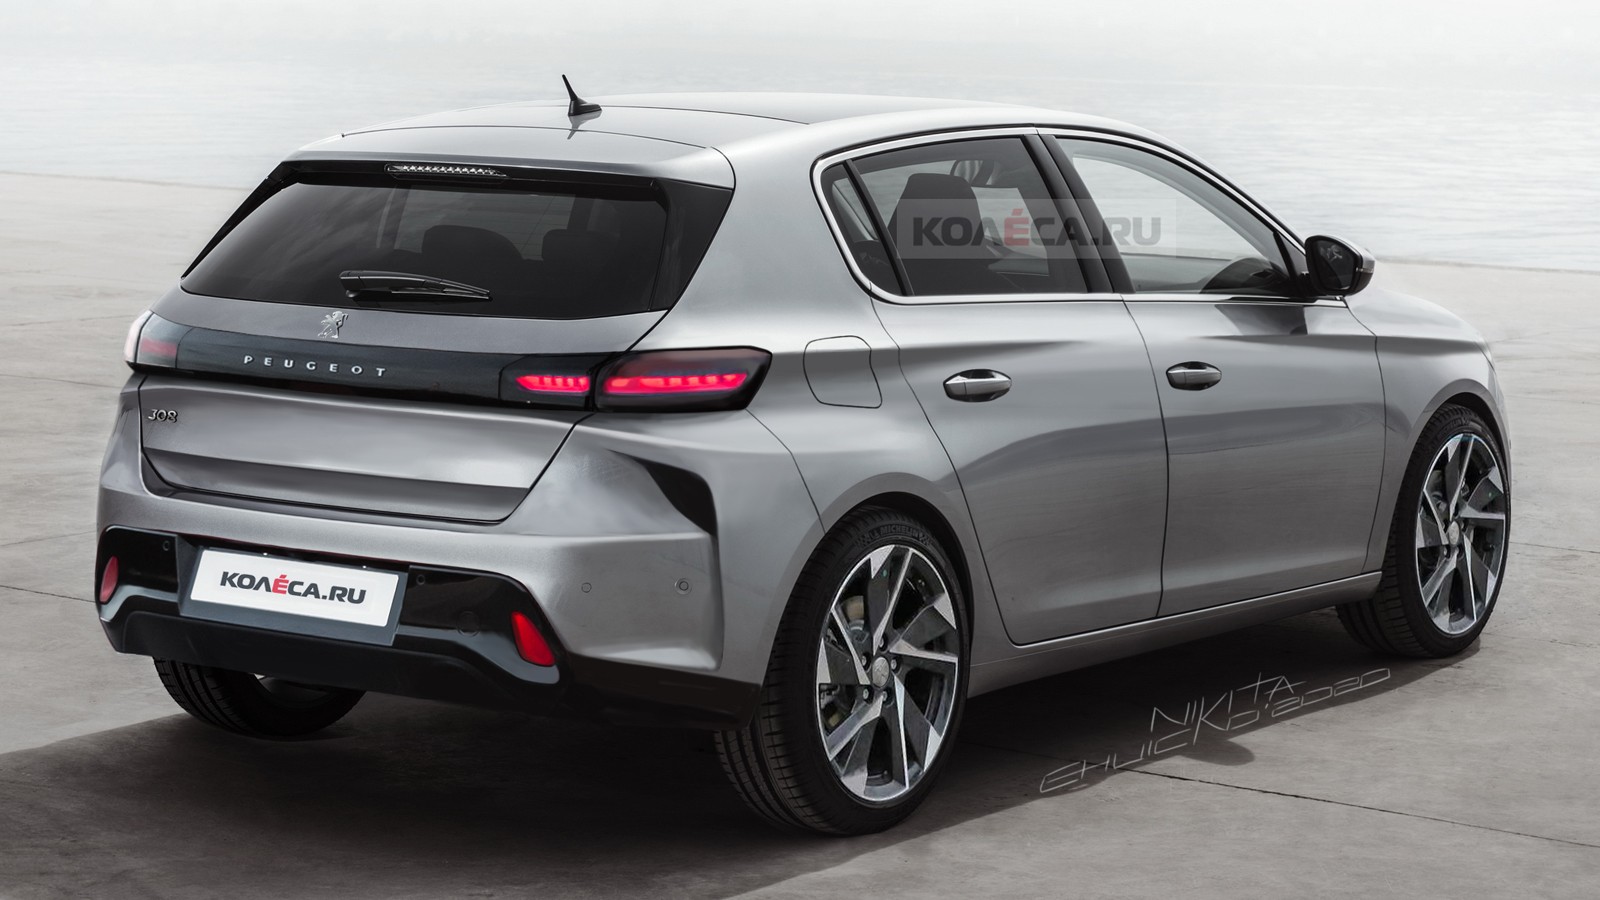 What If The New 2021 Peugeot 308 Looked Like This?